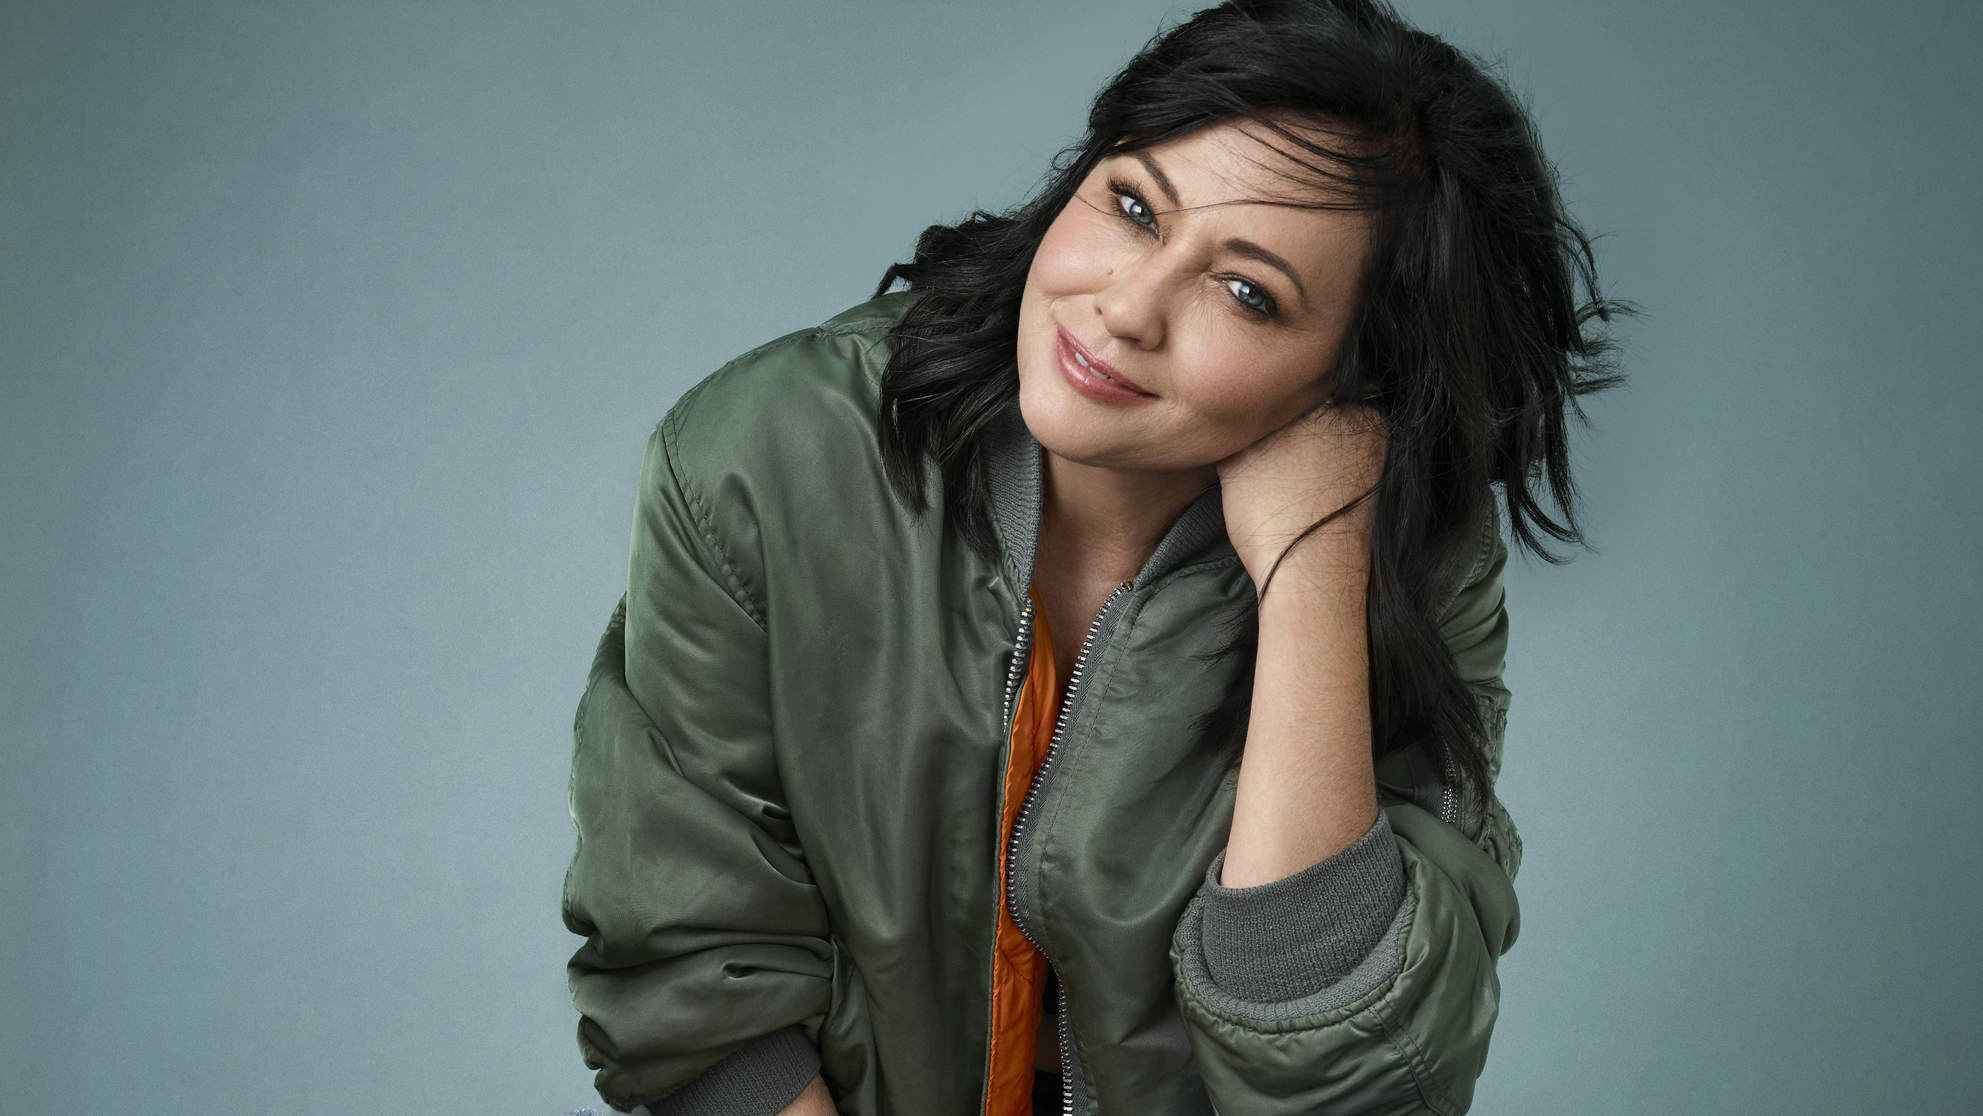 Shannen Doherty wearing an orange shirt and a green jacket